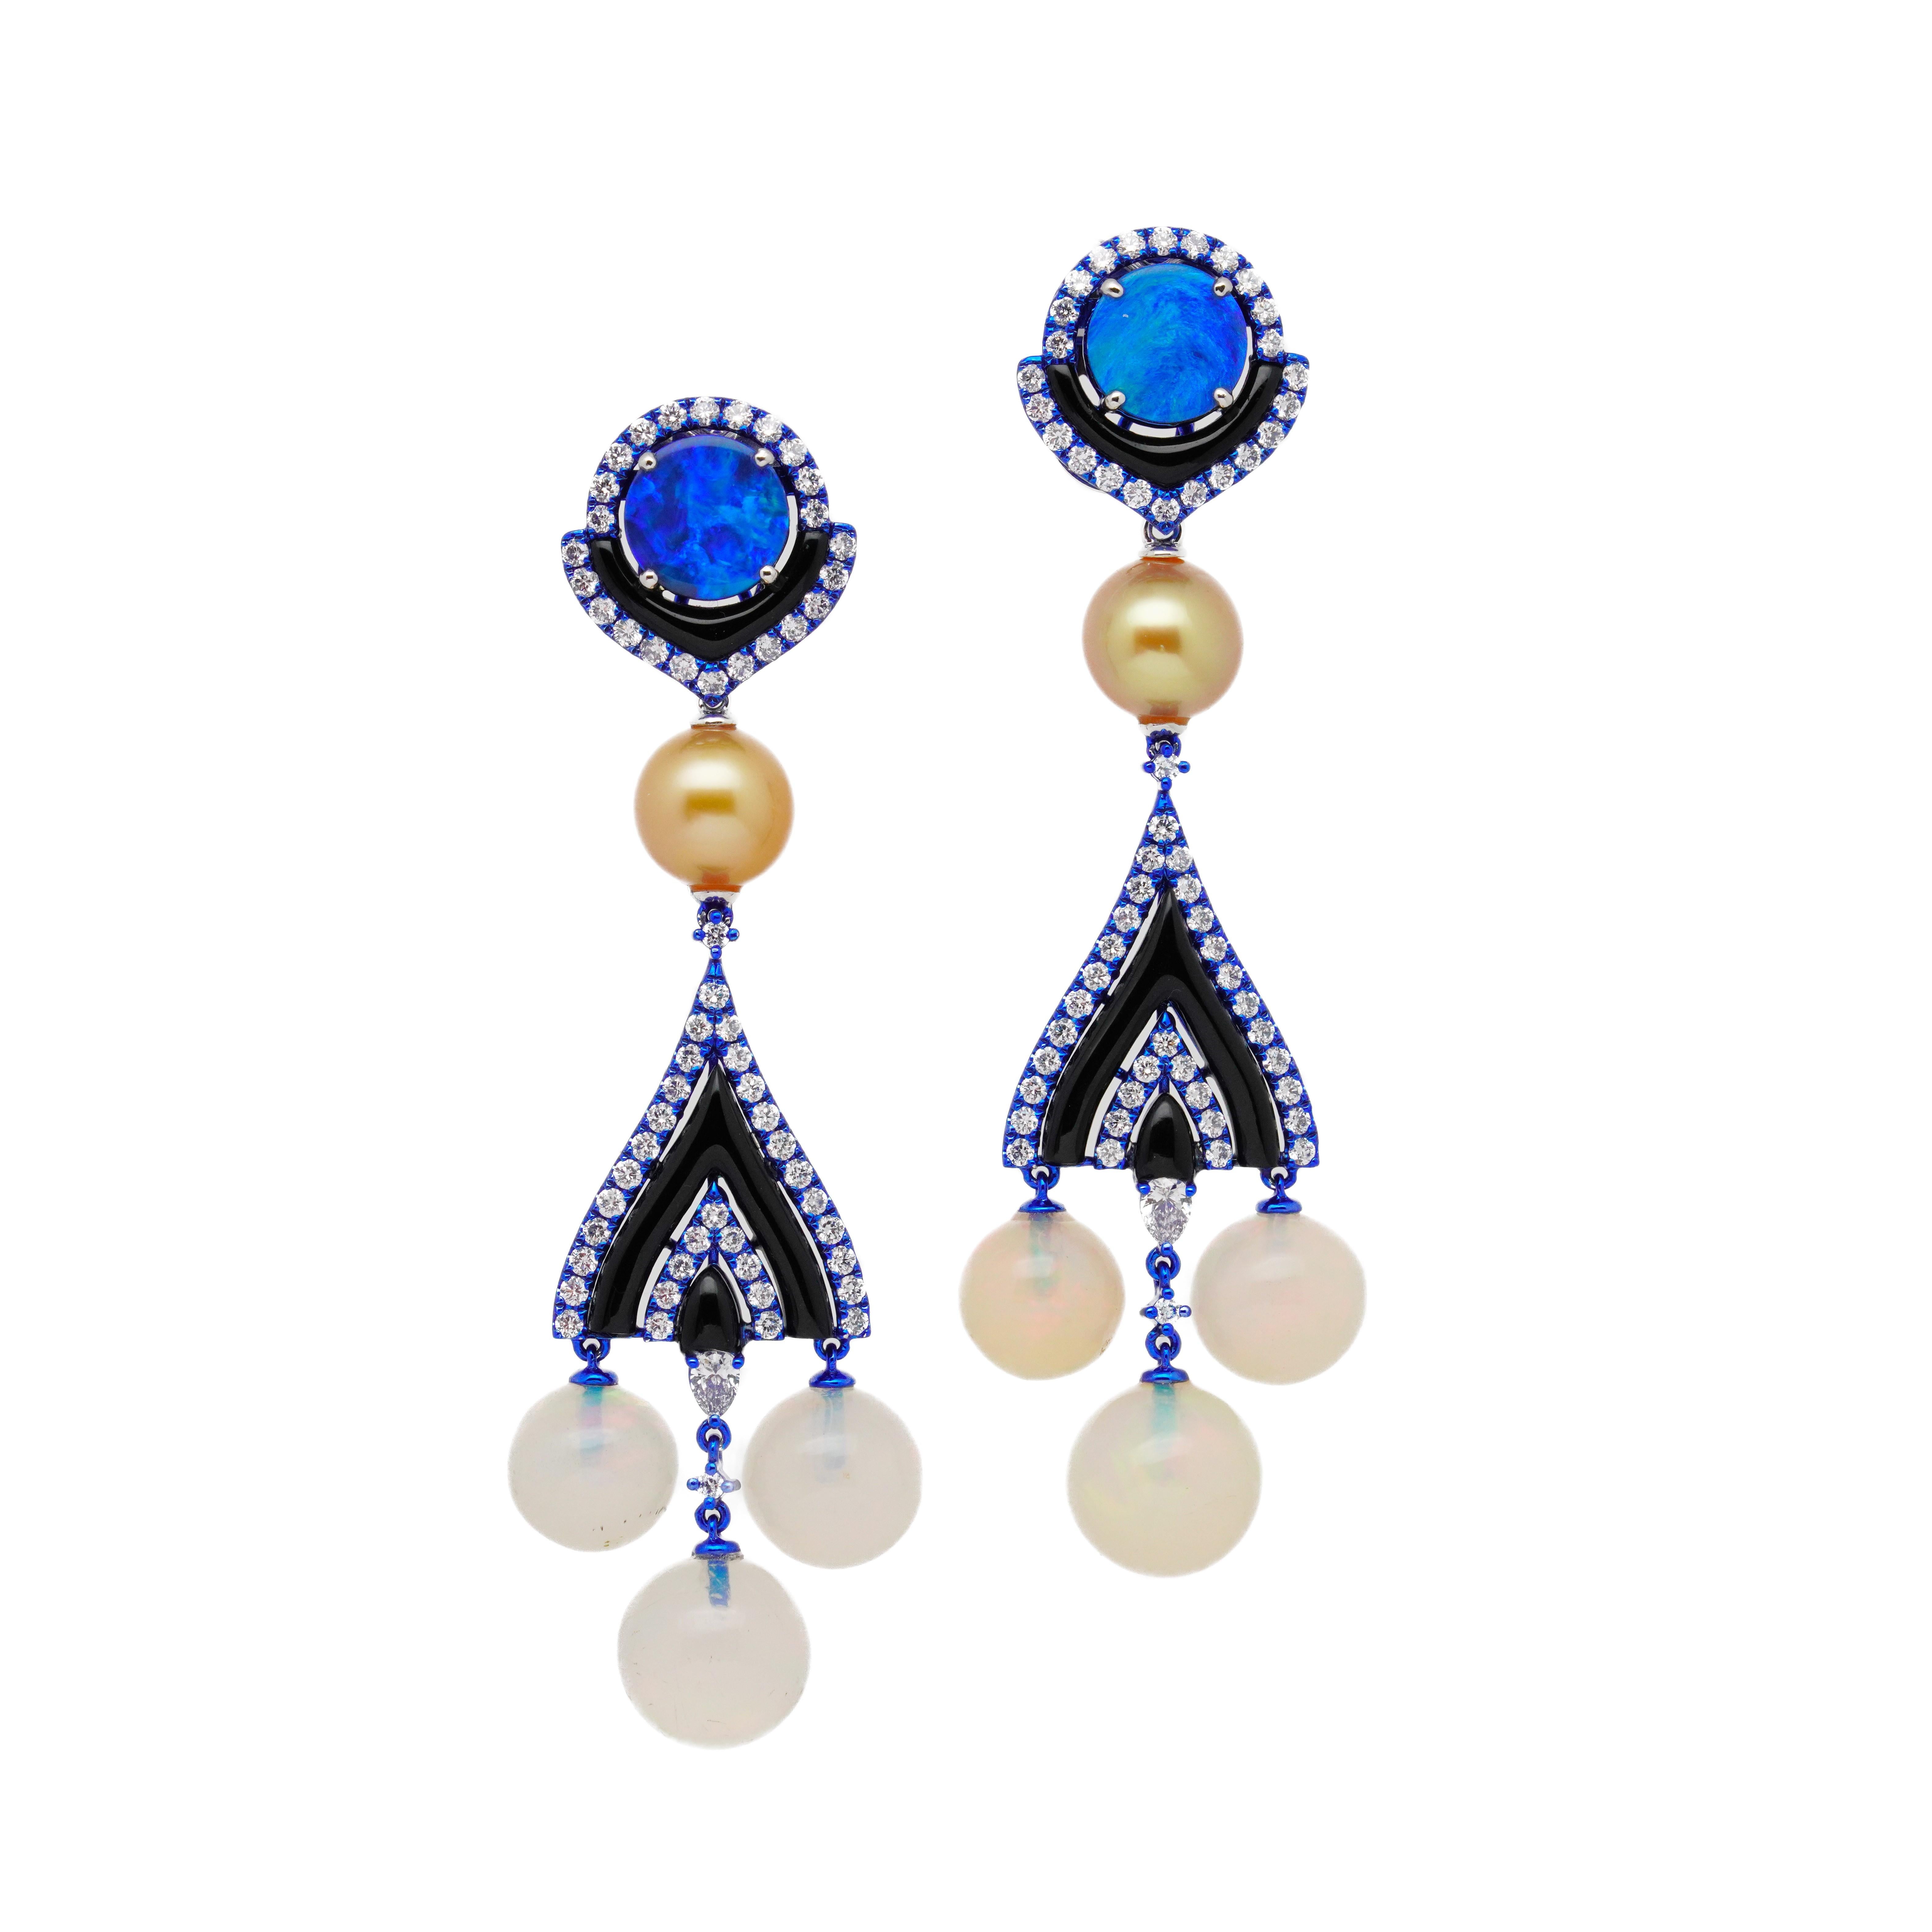 A very fine, art-deco and elegant pair of chandelier earrings by Austy Lee. This pair of earrings is made of Australian Boulder Opals, cultured South Sea Gold Pearls, Onxy, Ethiopian Opals and White Diamonds, set on blue color-plated 18K White Gold.